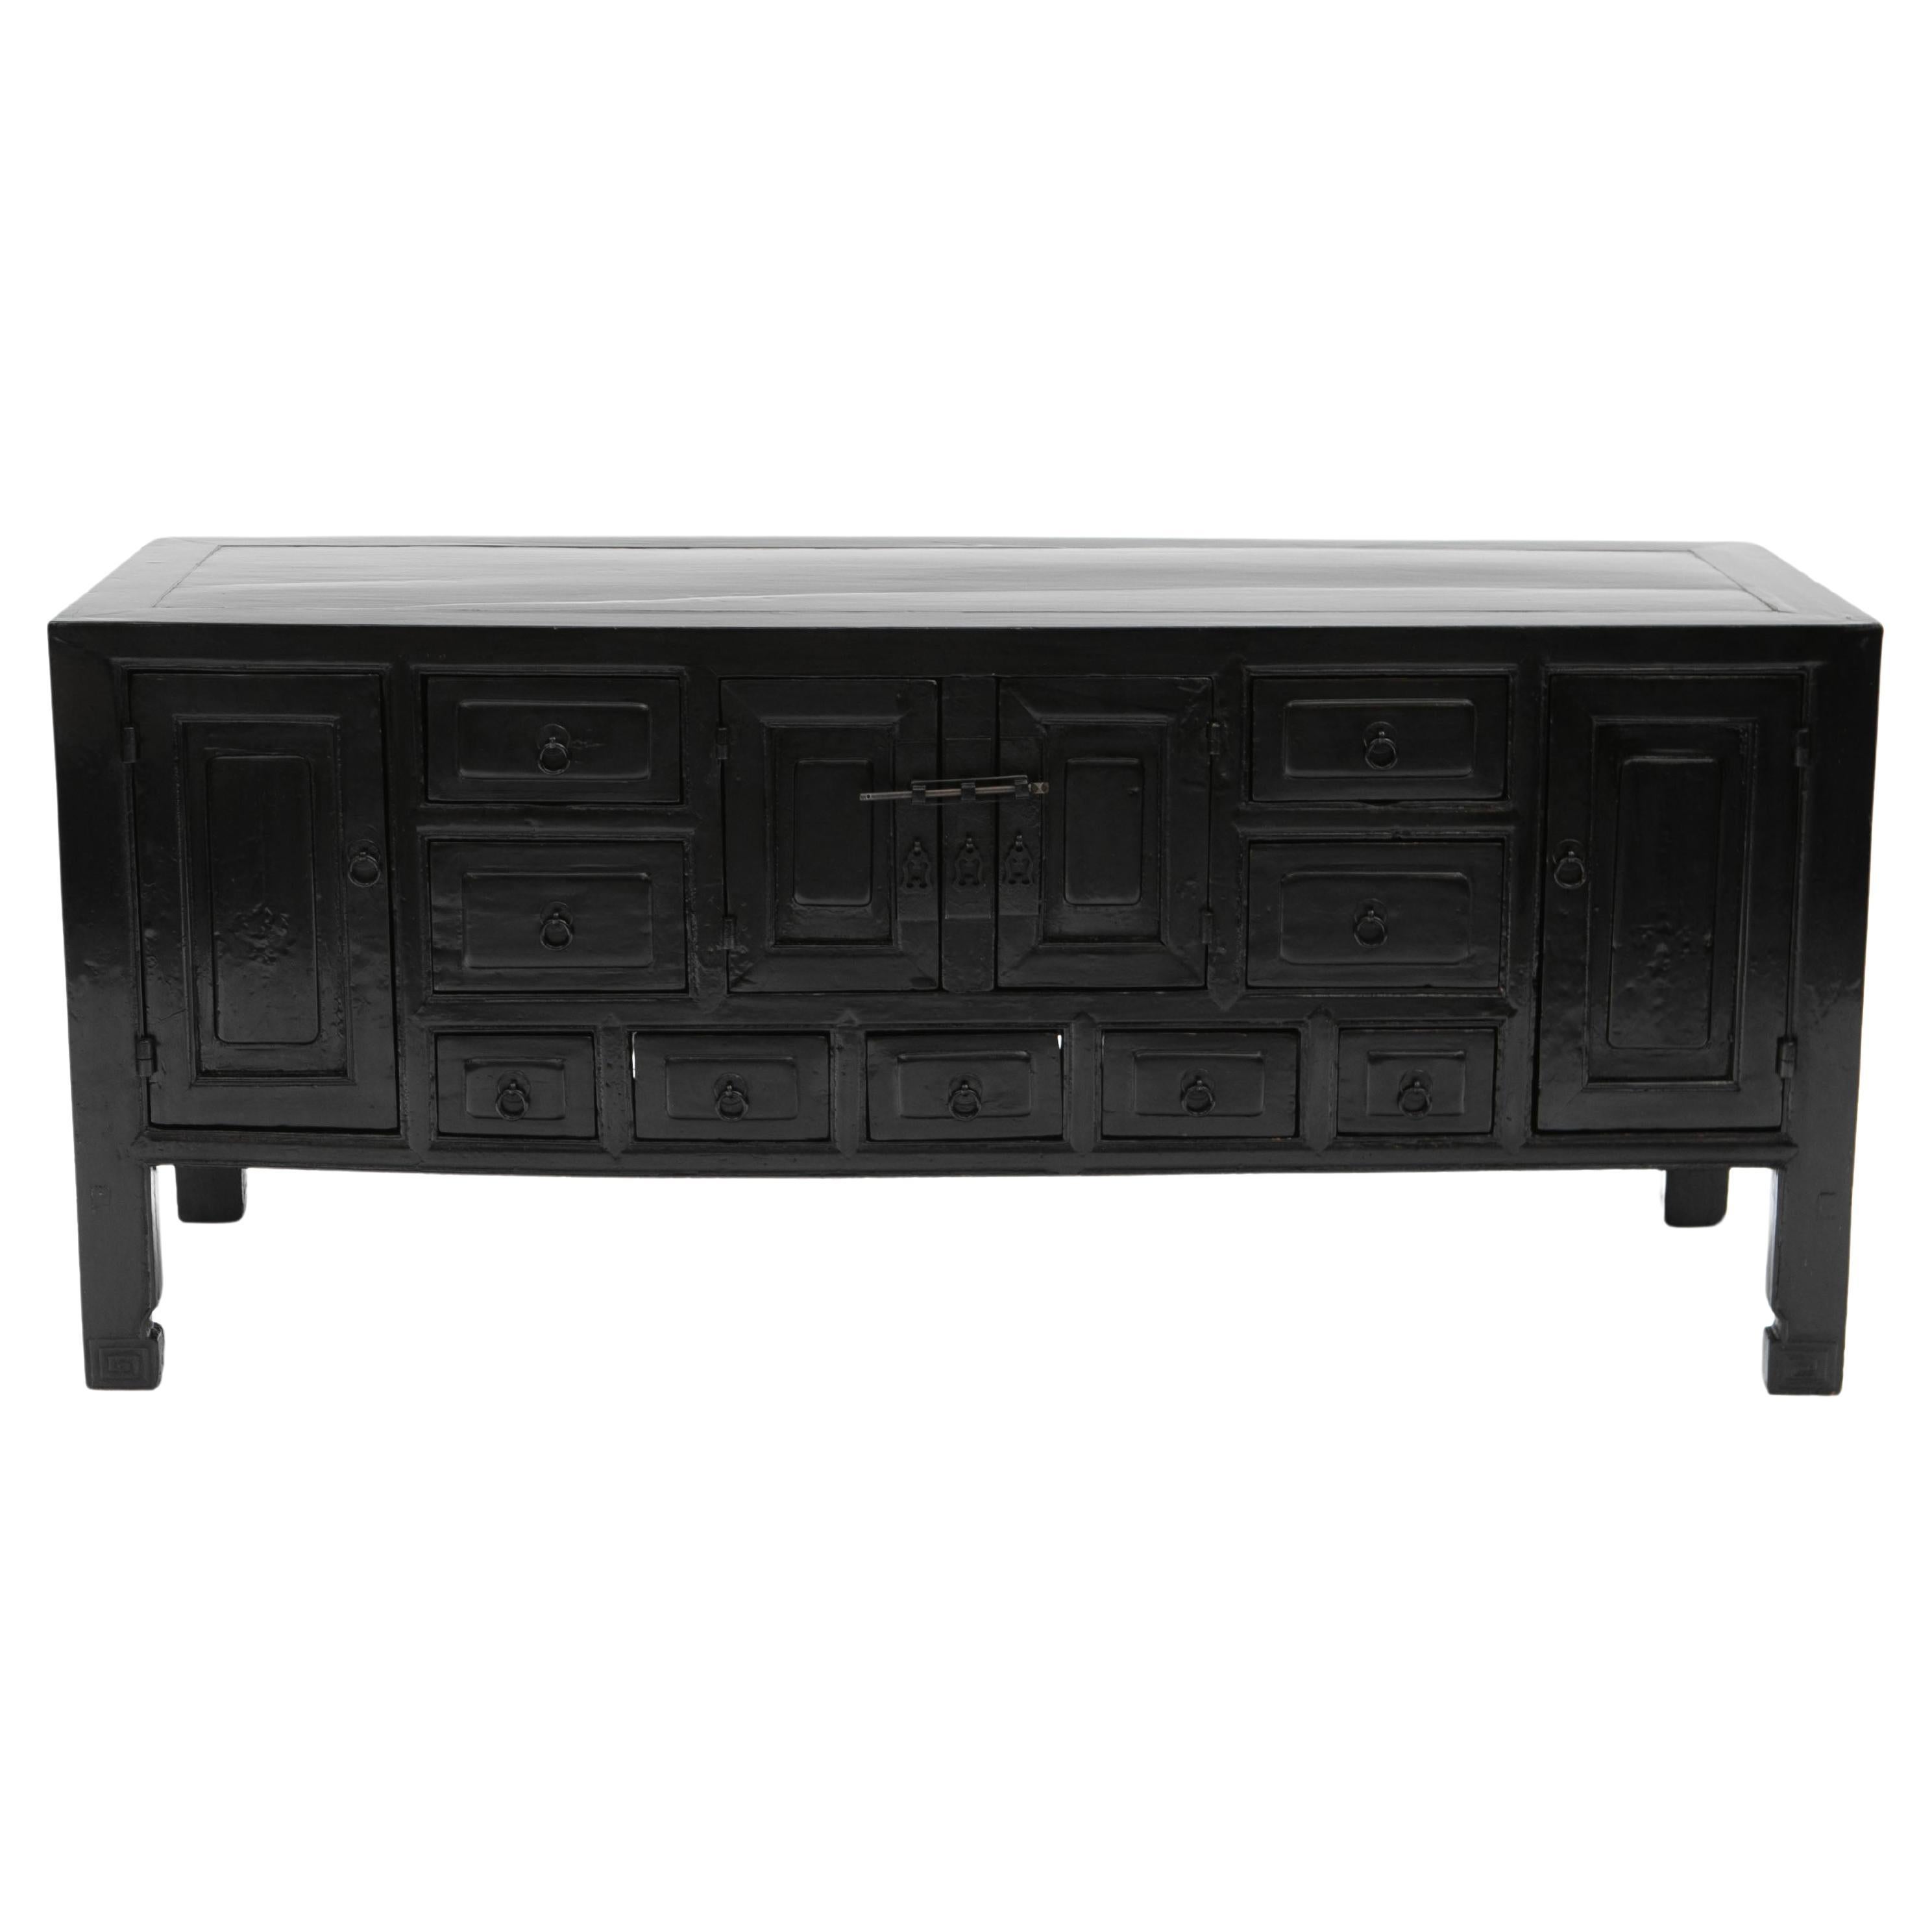 A Chinese art deco kang (low) cabinet or sideboard from the Hebei Province 1910-1920.

Chinese Qing dynasty low sideboard, also known as a kang (low) cabinet, with black lacquer.
Front with 9 drawers, a door on each side, and a pair of doors in the